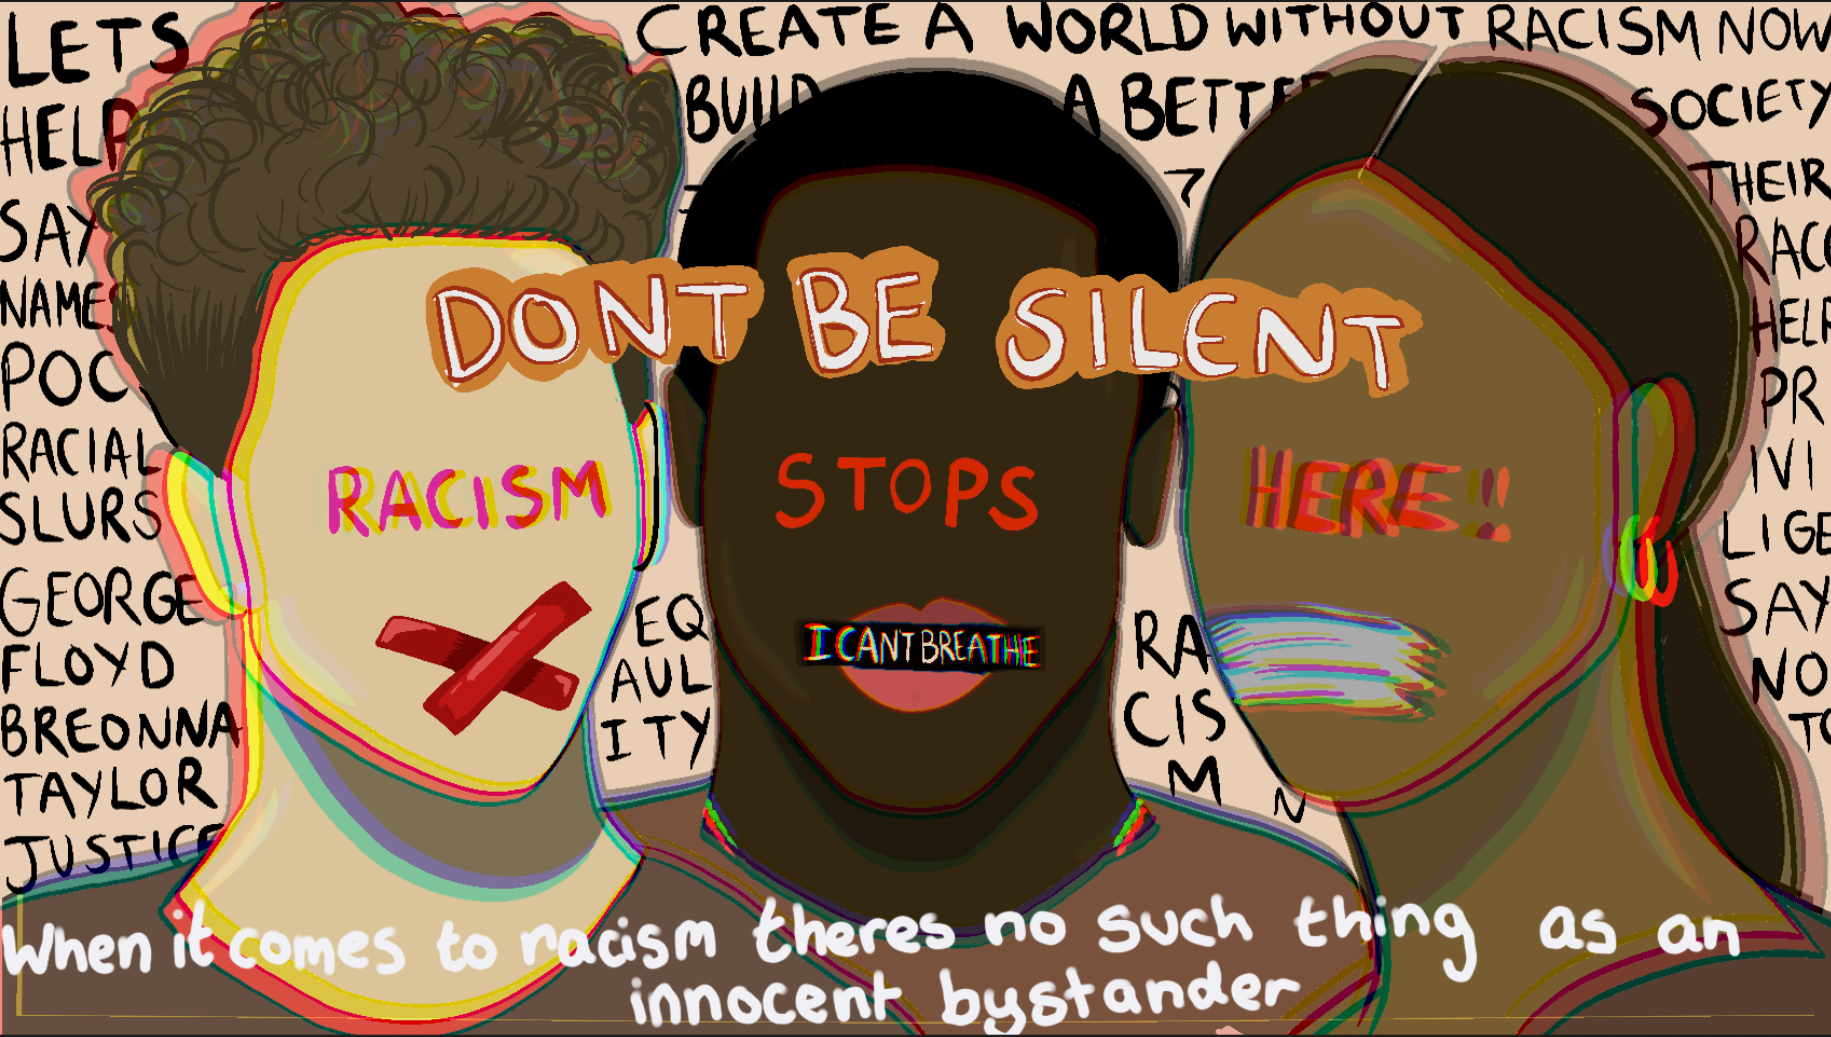 We Need to Learn What Racism is Before Creating a World Without It